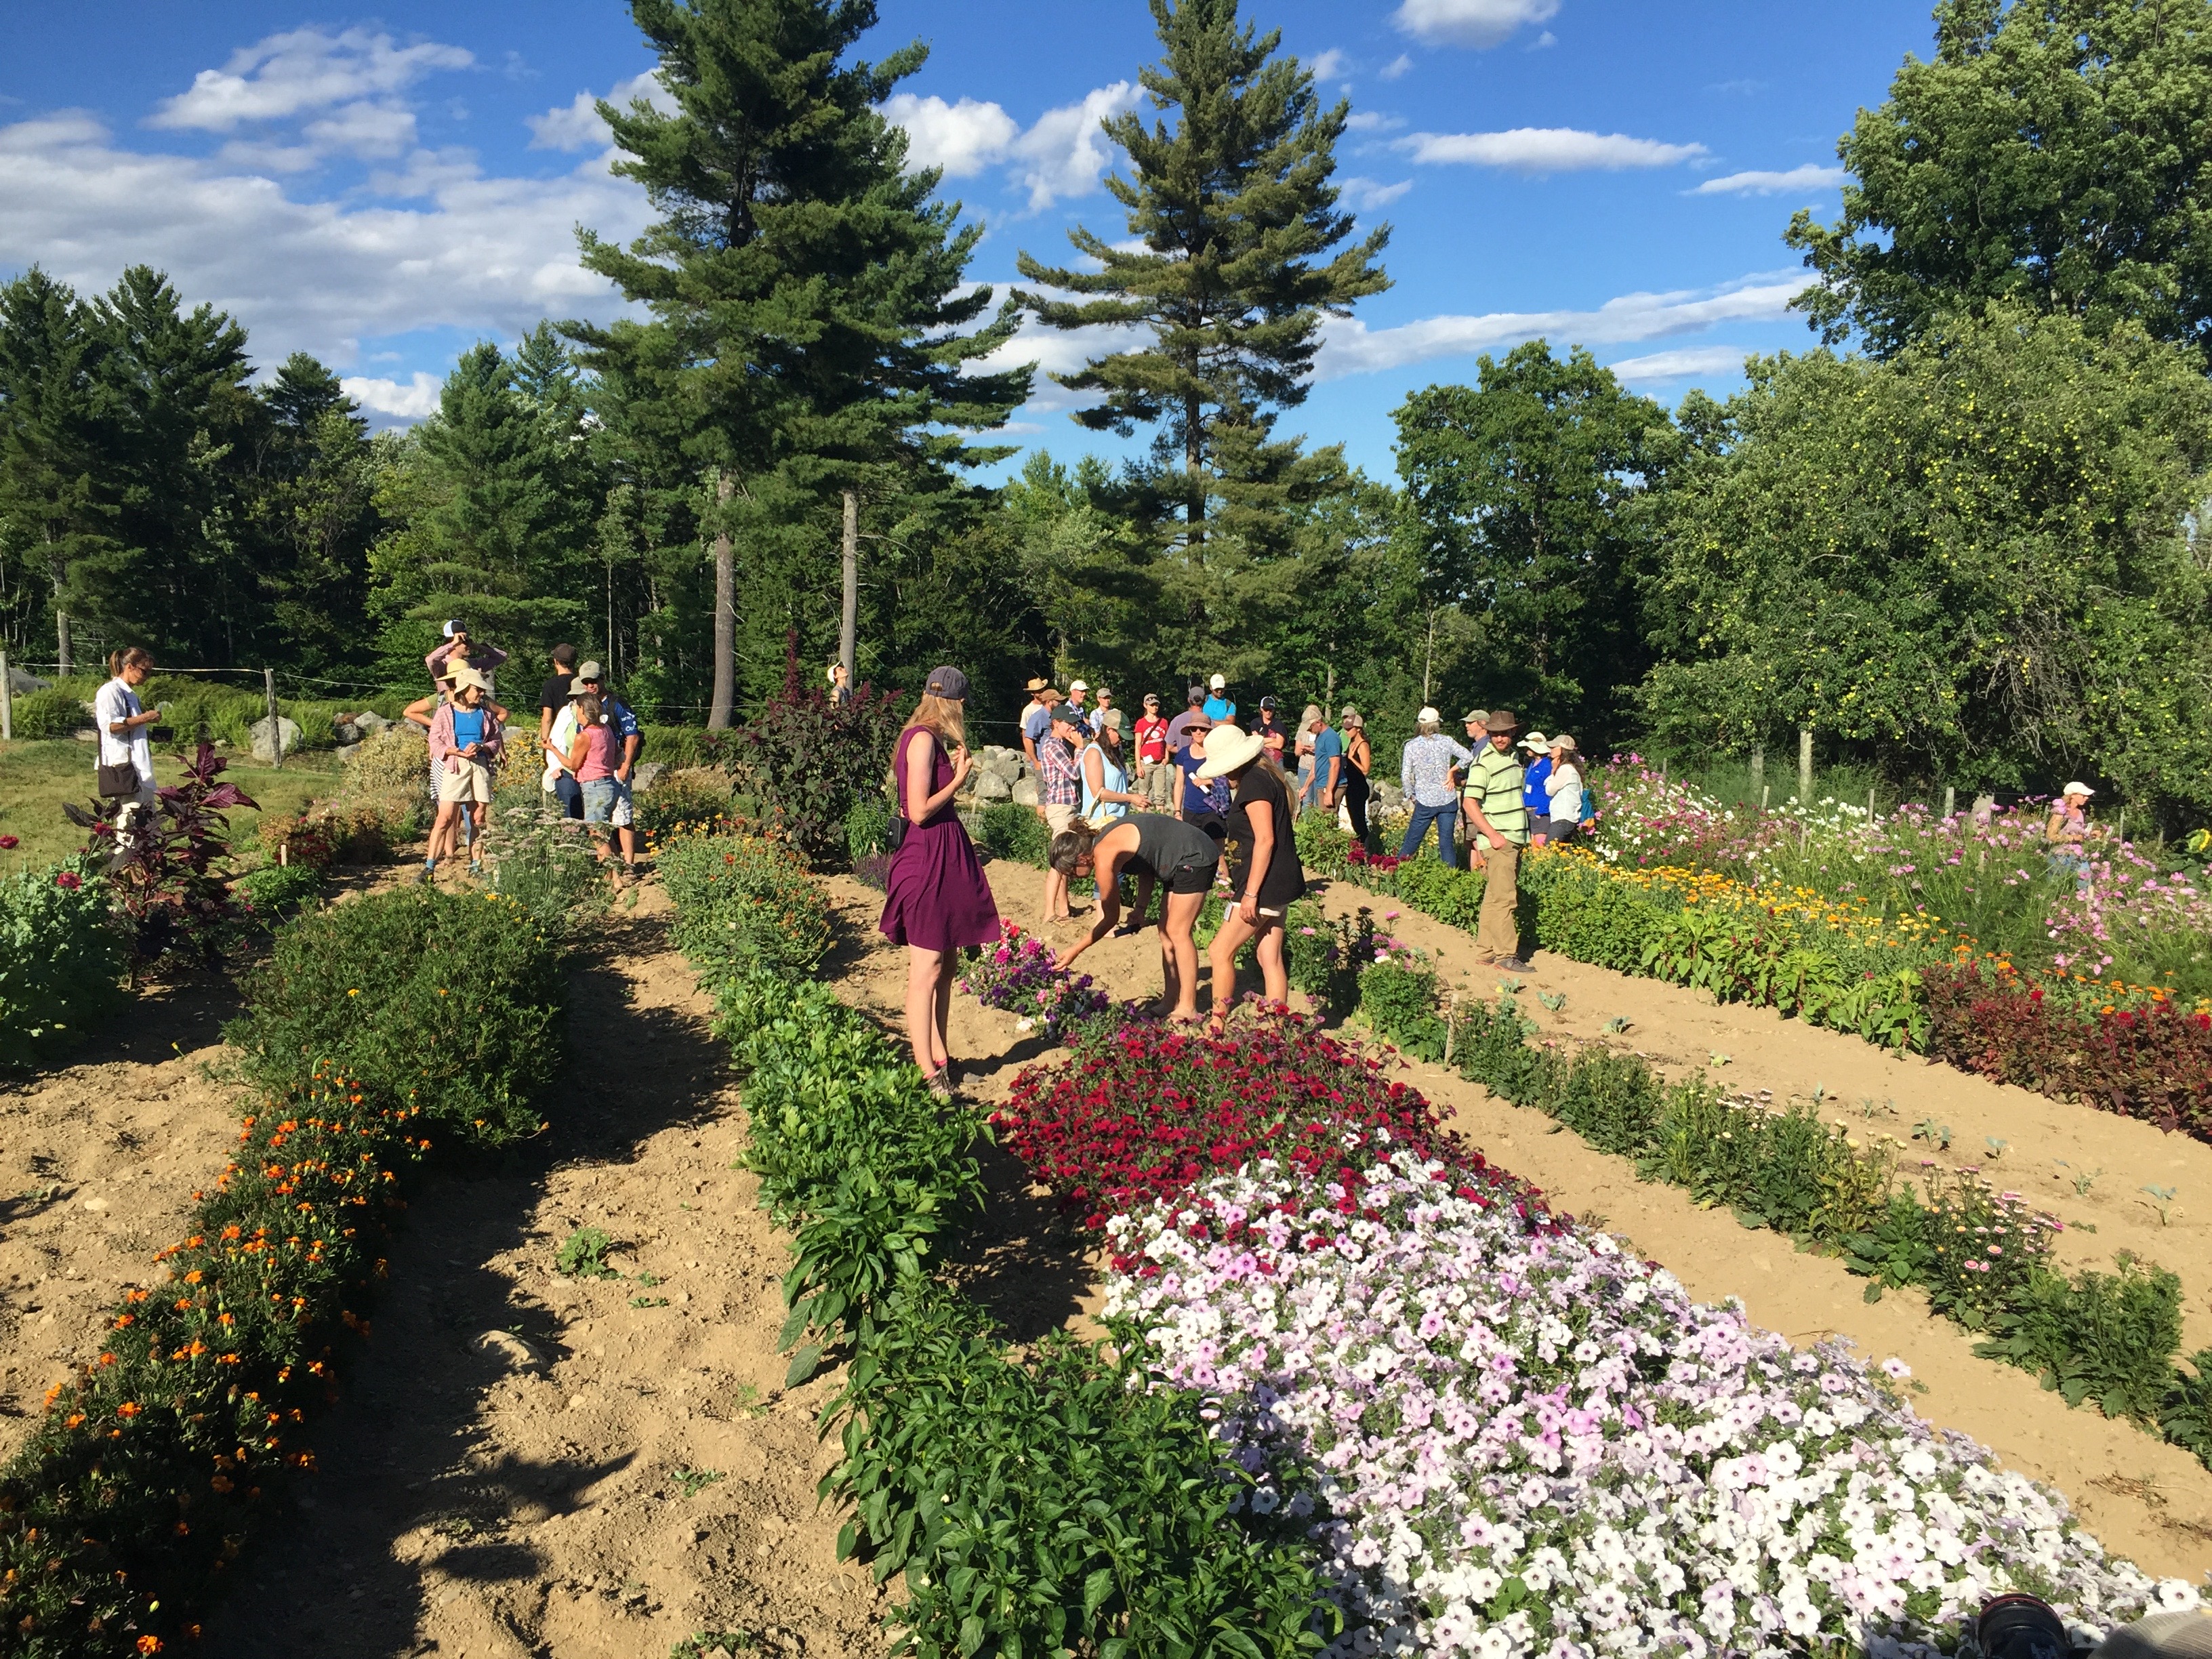 People standing among rows of flowers